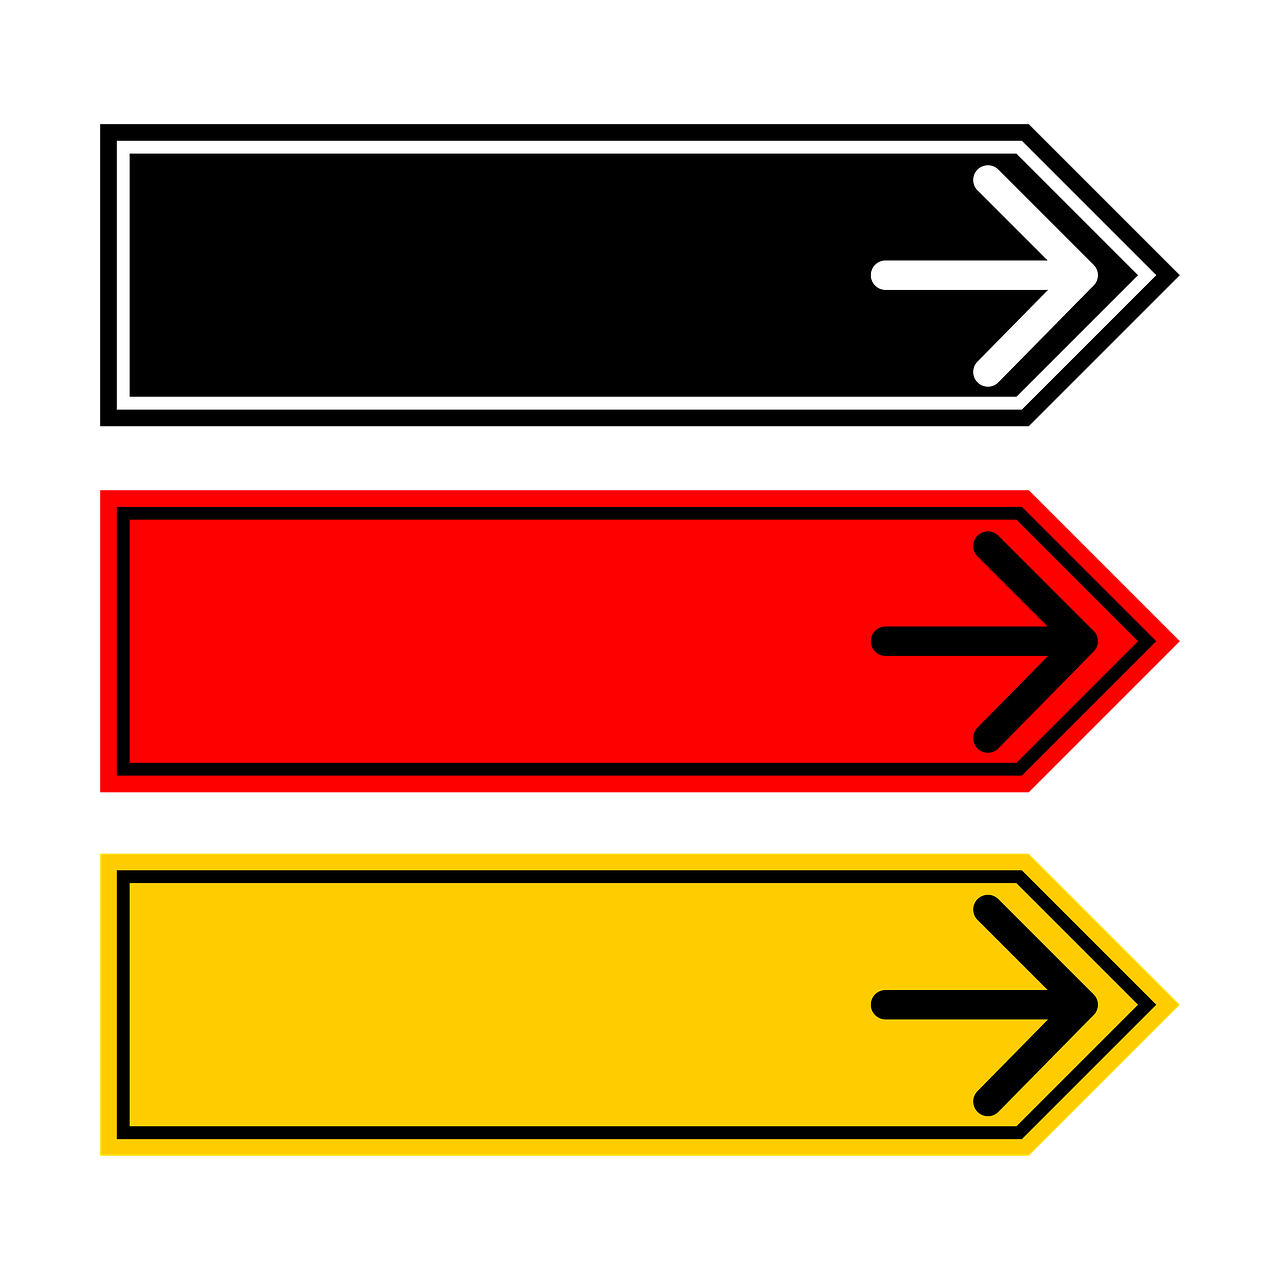 three arrows pointing in different directions on a black background, vector art, de stijl, red yellow flag, german, automotive, label